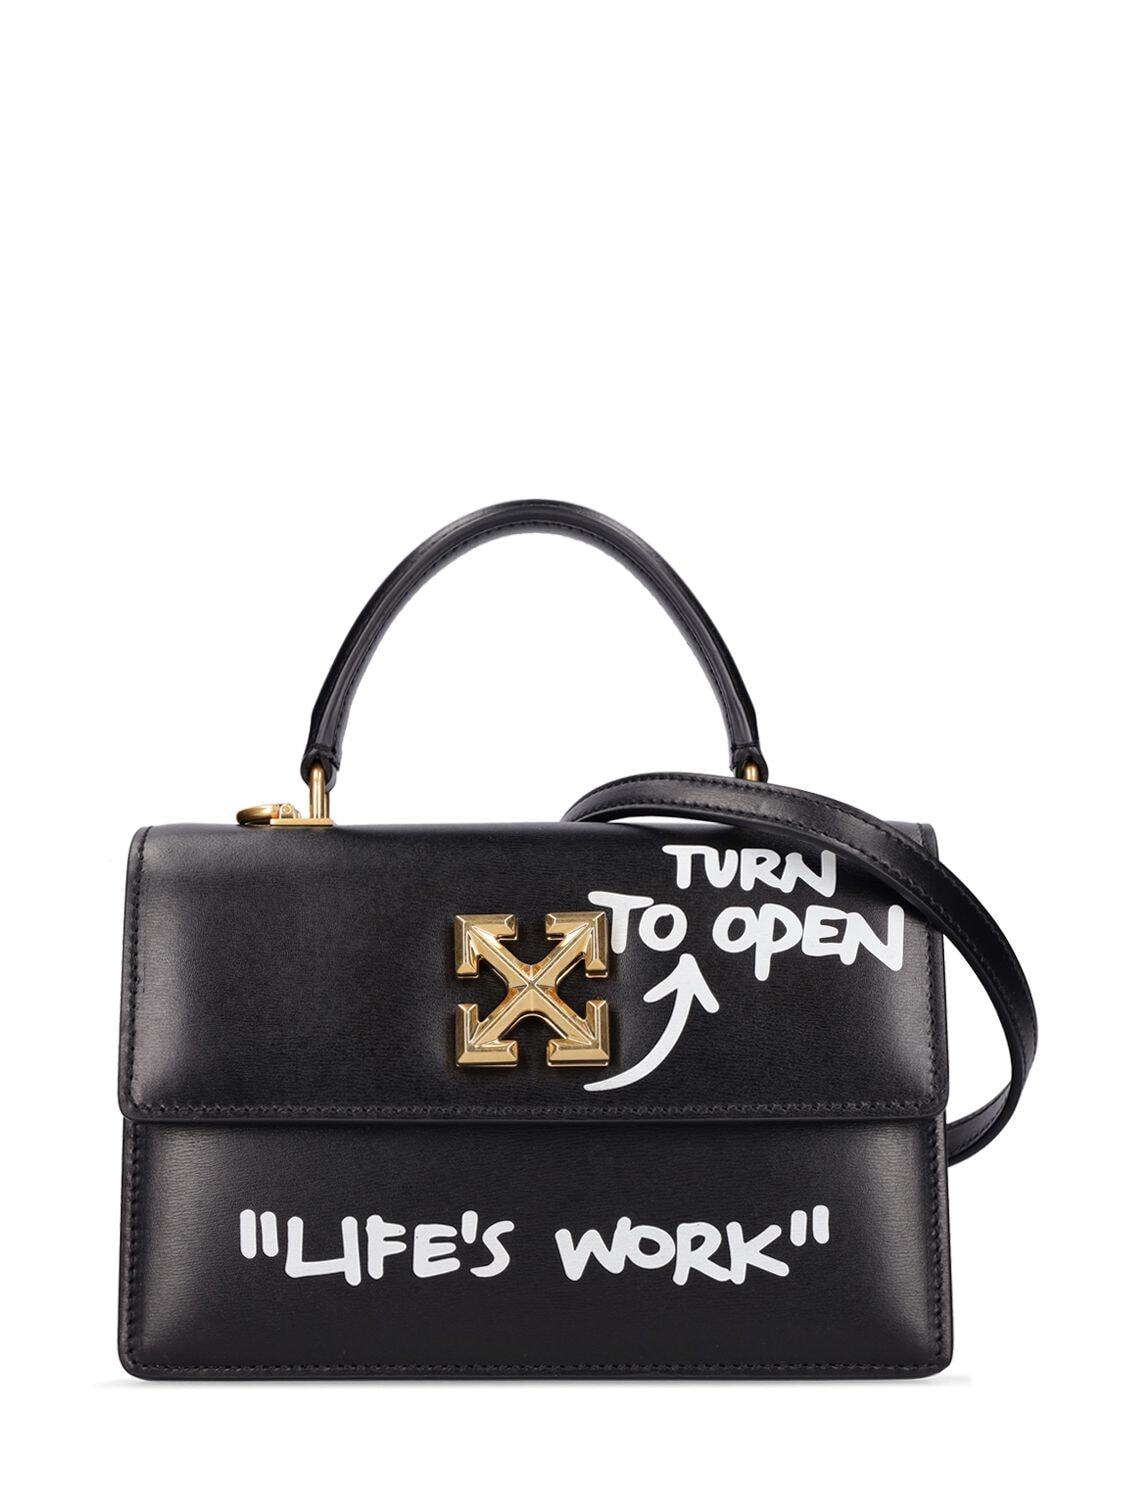 OFF-WHITE Jitney 1.4 Leather Top Handle Bag in black / white